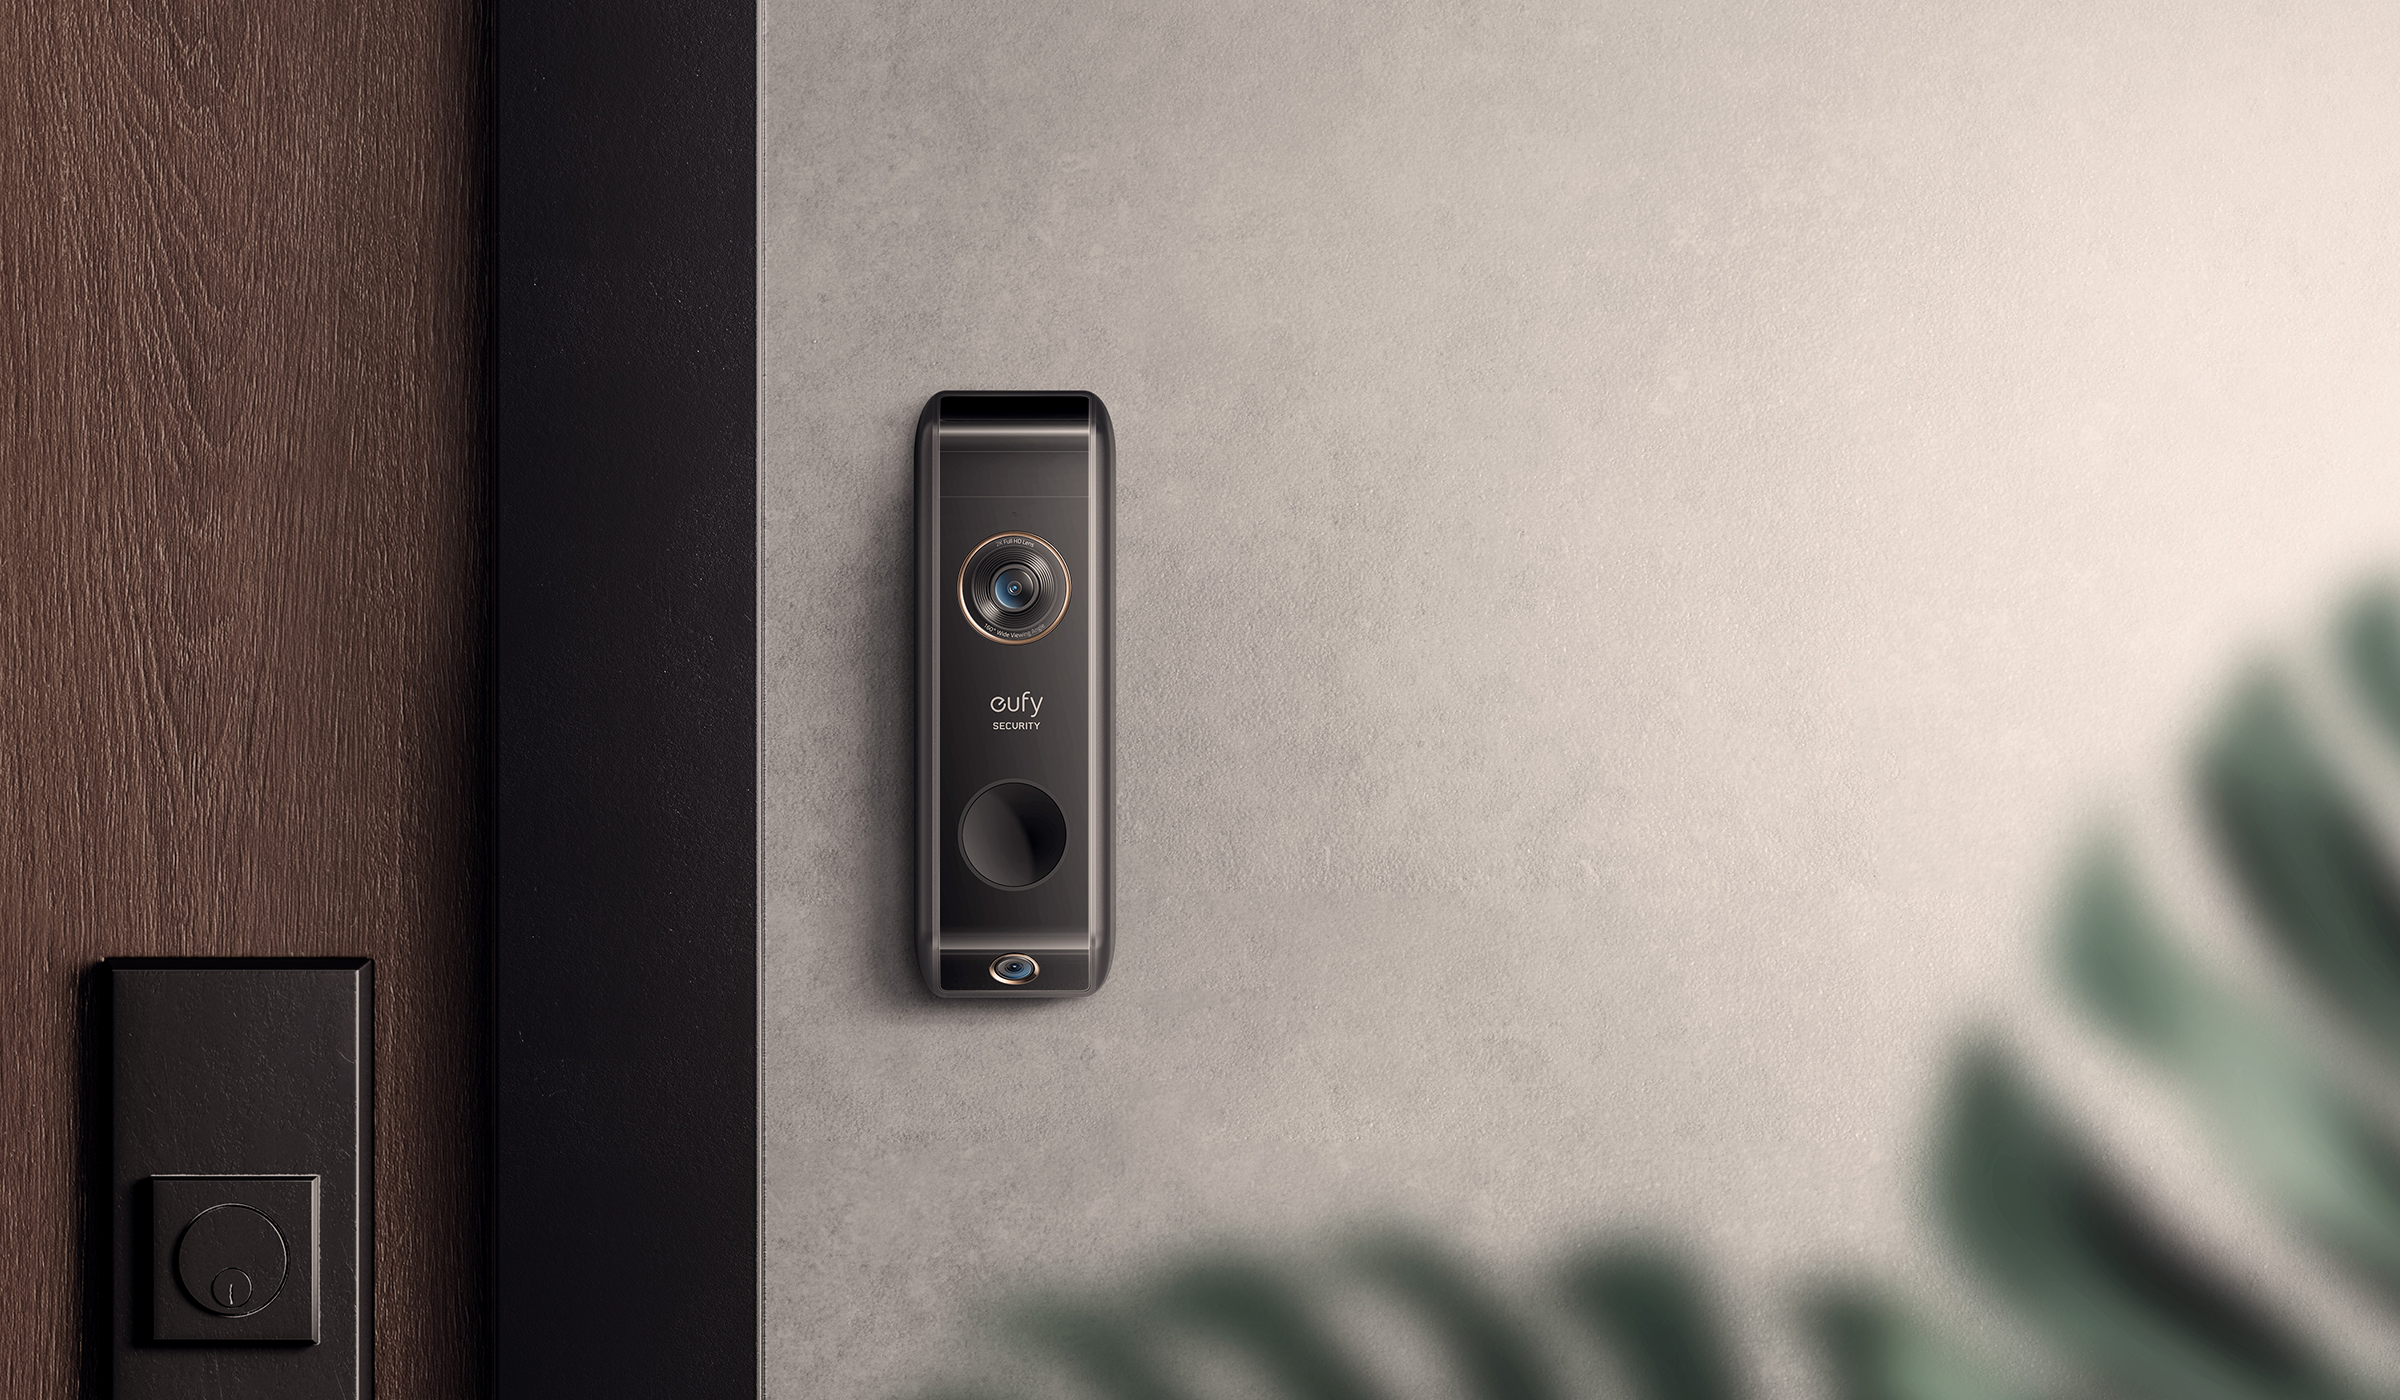 66 01 Eufy &Lt;H1 Class=&Quot;Product_Name&Quot;&Gt;Video Doorbell Dual(2K, Battery-Powered)&Lt;/H1&Gt; Https://Www.youtube.com/Watch?V=Piu4Munkd6U &Lt;Div Class=&Quot;Item&Quot;&Gt; &Lt;P Class=&Quot;Col&Quot;&Gt;&Lt;Strong&Gt;Dual Camera&Lt;/Strong&Gt; : &Lt;Span Class=&Quot;Value&Quot;&Gt;Front Camera 160°, Package Camera 97°&Lt;/Span&Gt;&Lt;/P&Gt; &Lt;/Div&Gt; &Lt;Div Class=&Quot;Item&Quot;&Gt; &Lt;P Class=&Quot;Col&Quot; Style=&Quot;Text-Align: Left;&Quot;&Gt;&Lt;Strong&Gt;Video Quality&Lt;/Strong&Gt; : &Lt;Span Class=&Quot;Value&Quot;&Gt;Front Camera 2K (2560 ×1920), Package Camera 1080P (1600 × ️1200)&Lt;/Span&Gt;&Lt;/P&Gt; &Lt;/Div&Gt; &Lt;Div Class=&Quot;Item&Quot; Style=&Quot;Text-Align: Left;&Quot;&Gt; &Lt;P Class=&Quot;Col&Quot;&Gt;&Lt;Strong&Gt;Smart Ai Support&Lt;/Strong&Gt;: &Lt;Span Class=&Quot;Value&Quot;&Gt;Package Detection, Waiting Detection, Human Detection&Lt;/Span&Gt;&Lt;/P&Gt; &Lt;/Div&Gt; &Lt;Div Class=&Quot;Item&Quot; Style=&Quot;Text-Align: Left;&Quot;&Gt; &Lt;P Class=&Quot;Col&Quot;&Gt;&Lt;Strong&Gt;Motion Detection&Lt;/Strong&Gt;: &Lt;Span Class=&Quot;Value&Quot;&Gt;Radar Detection, Pir Detection&Lt;/Span&Gt;&Lt;/P&Gt; &Lt;/Div&Gt; &Lt;Div Class=&Quot;Item&Quot;&Gt; &Lt;P Class=&Quot;Col&Quot; Style=&Quot;Text-Align: Left;&Quot;&Gt;&Lt;Strong&Gt;Video Storage&Lt;/Strong&Gt;: Motion-Activated Event Recording. Homebase 2 Contains 16Gb Of Local Storage (Lasts Up To 90 Days). &Lt;Span Class=&Quot;Value&Quot;&Gt;The Recording Duration Estimation Model Is 25 Recordings Per Day; Each Recording Lasts 15 Seconds.&Lt;/Span&Gt;&Lt;/P&Gt; &Lt;Ul&Gt; &Lt;Li&Gt;1 Charge Last 6 Months&Lt;/Li&Gt; &Lt;Li&Gt;Family Recognition&Lt;/Li&Gt; &Lt;Li&Gt;Works With Voice Assistant&Lt;/Li&Gt; &Lt;/Ul&Gt; &Lt;Pre&Gt;One Year Eufy Warranty&Lt;/Pre&Gt; &Nbsp; &Lt;/Div&Gt; Video Doorbell Eufy Video Doorbell Dual (2K, Battery-Powered)